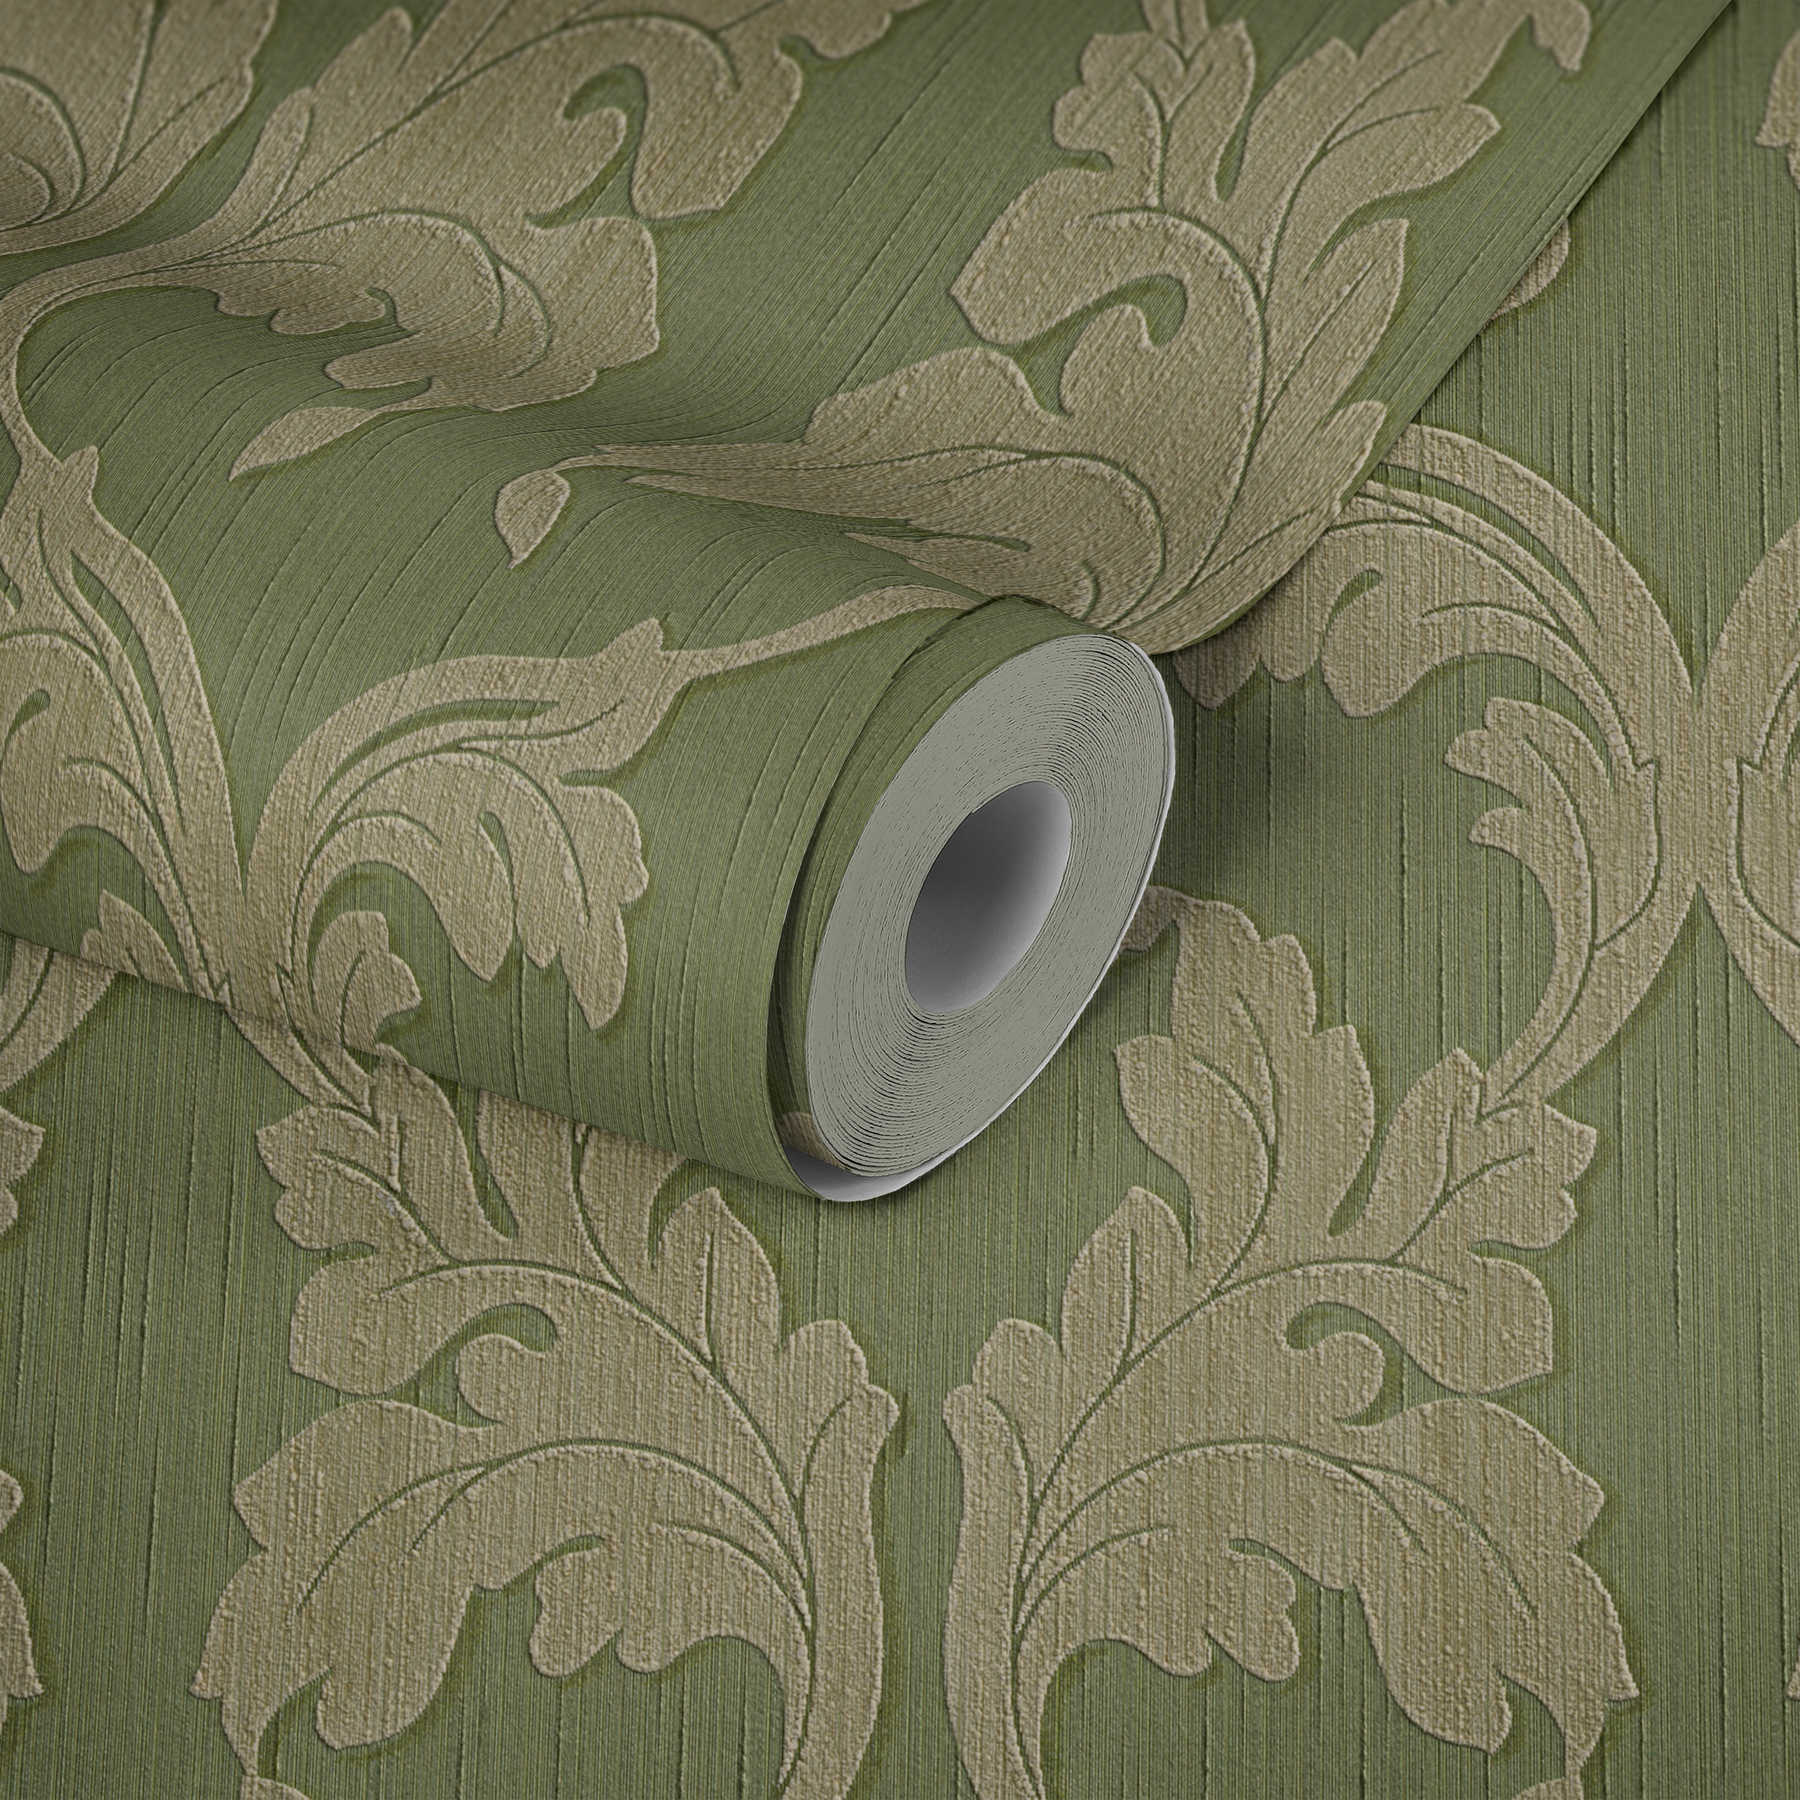             Wallpaper with ornamental vines & textured pattern - green
        